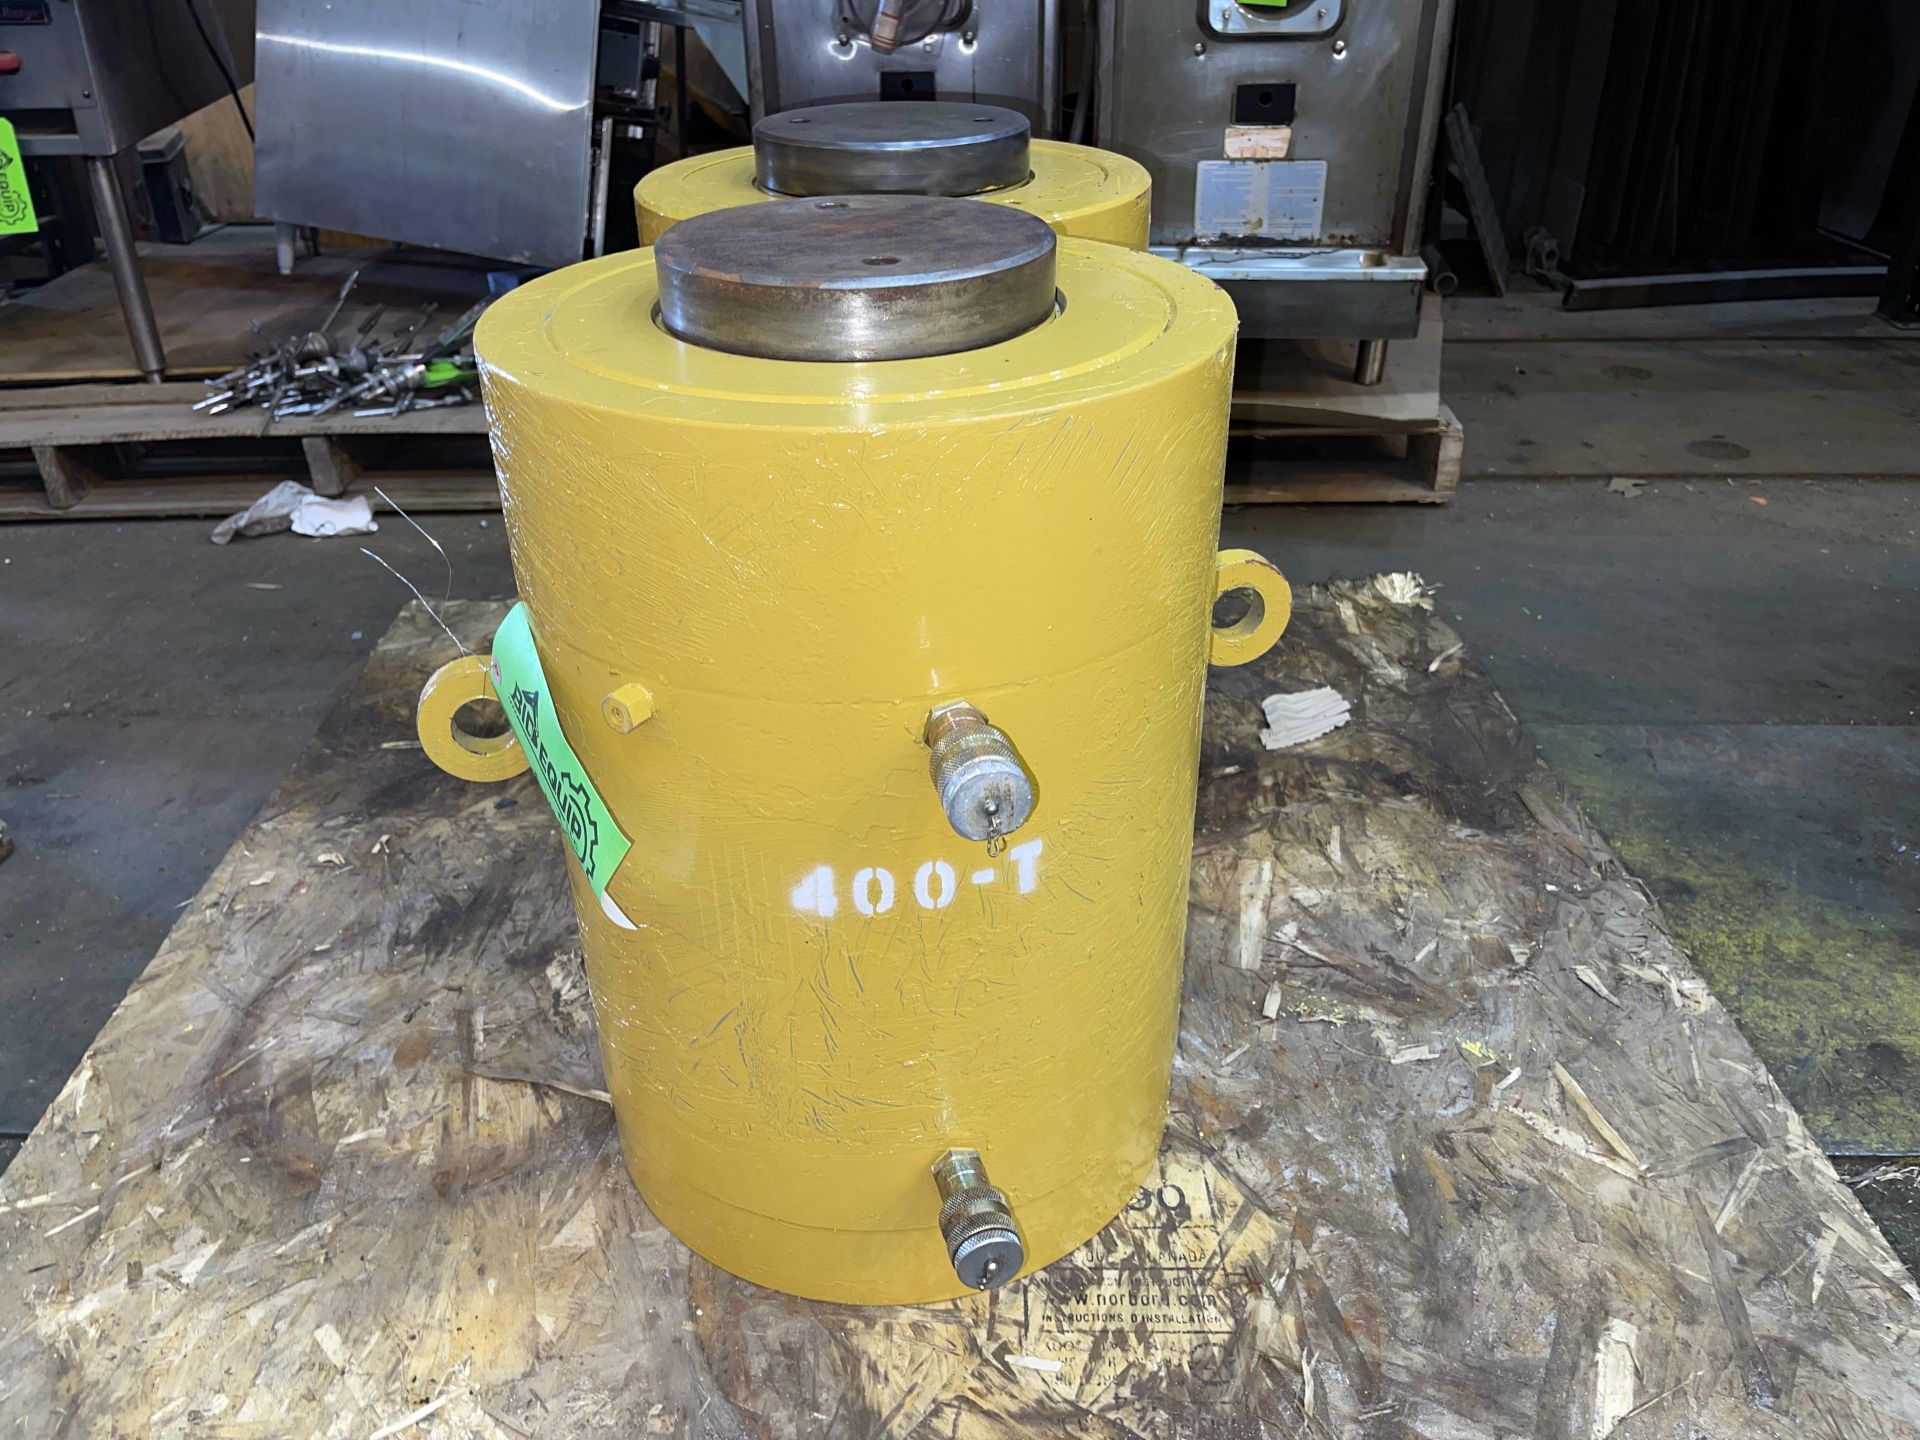 Lot of 2 400 Ton Hydraulic Jacks (EH141) - Lester, PA - Image 2 of 4